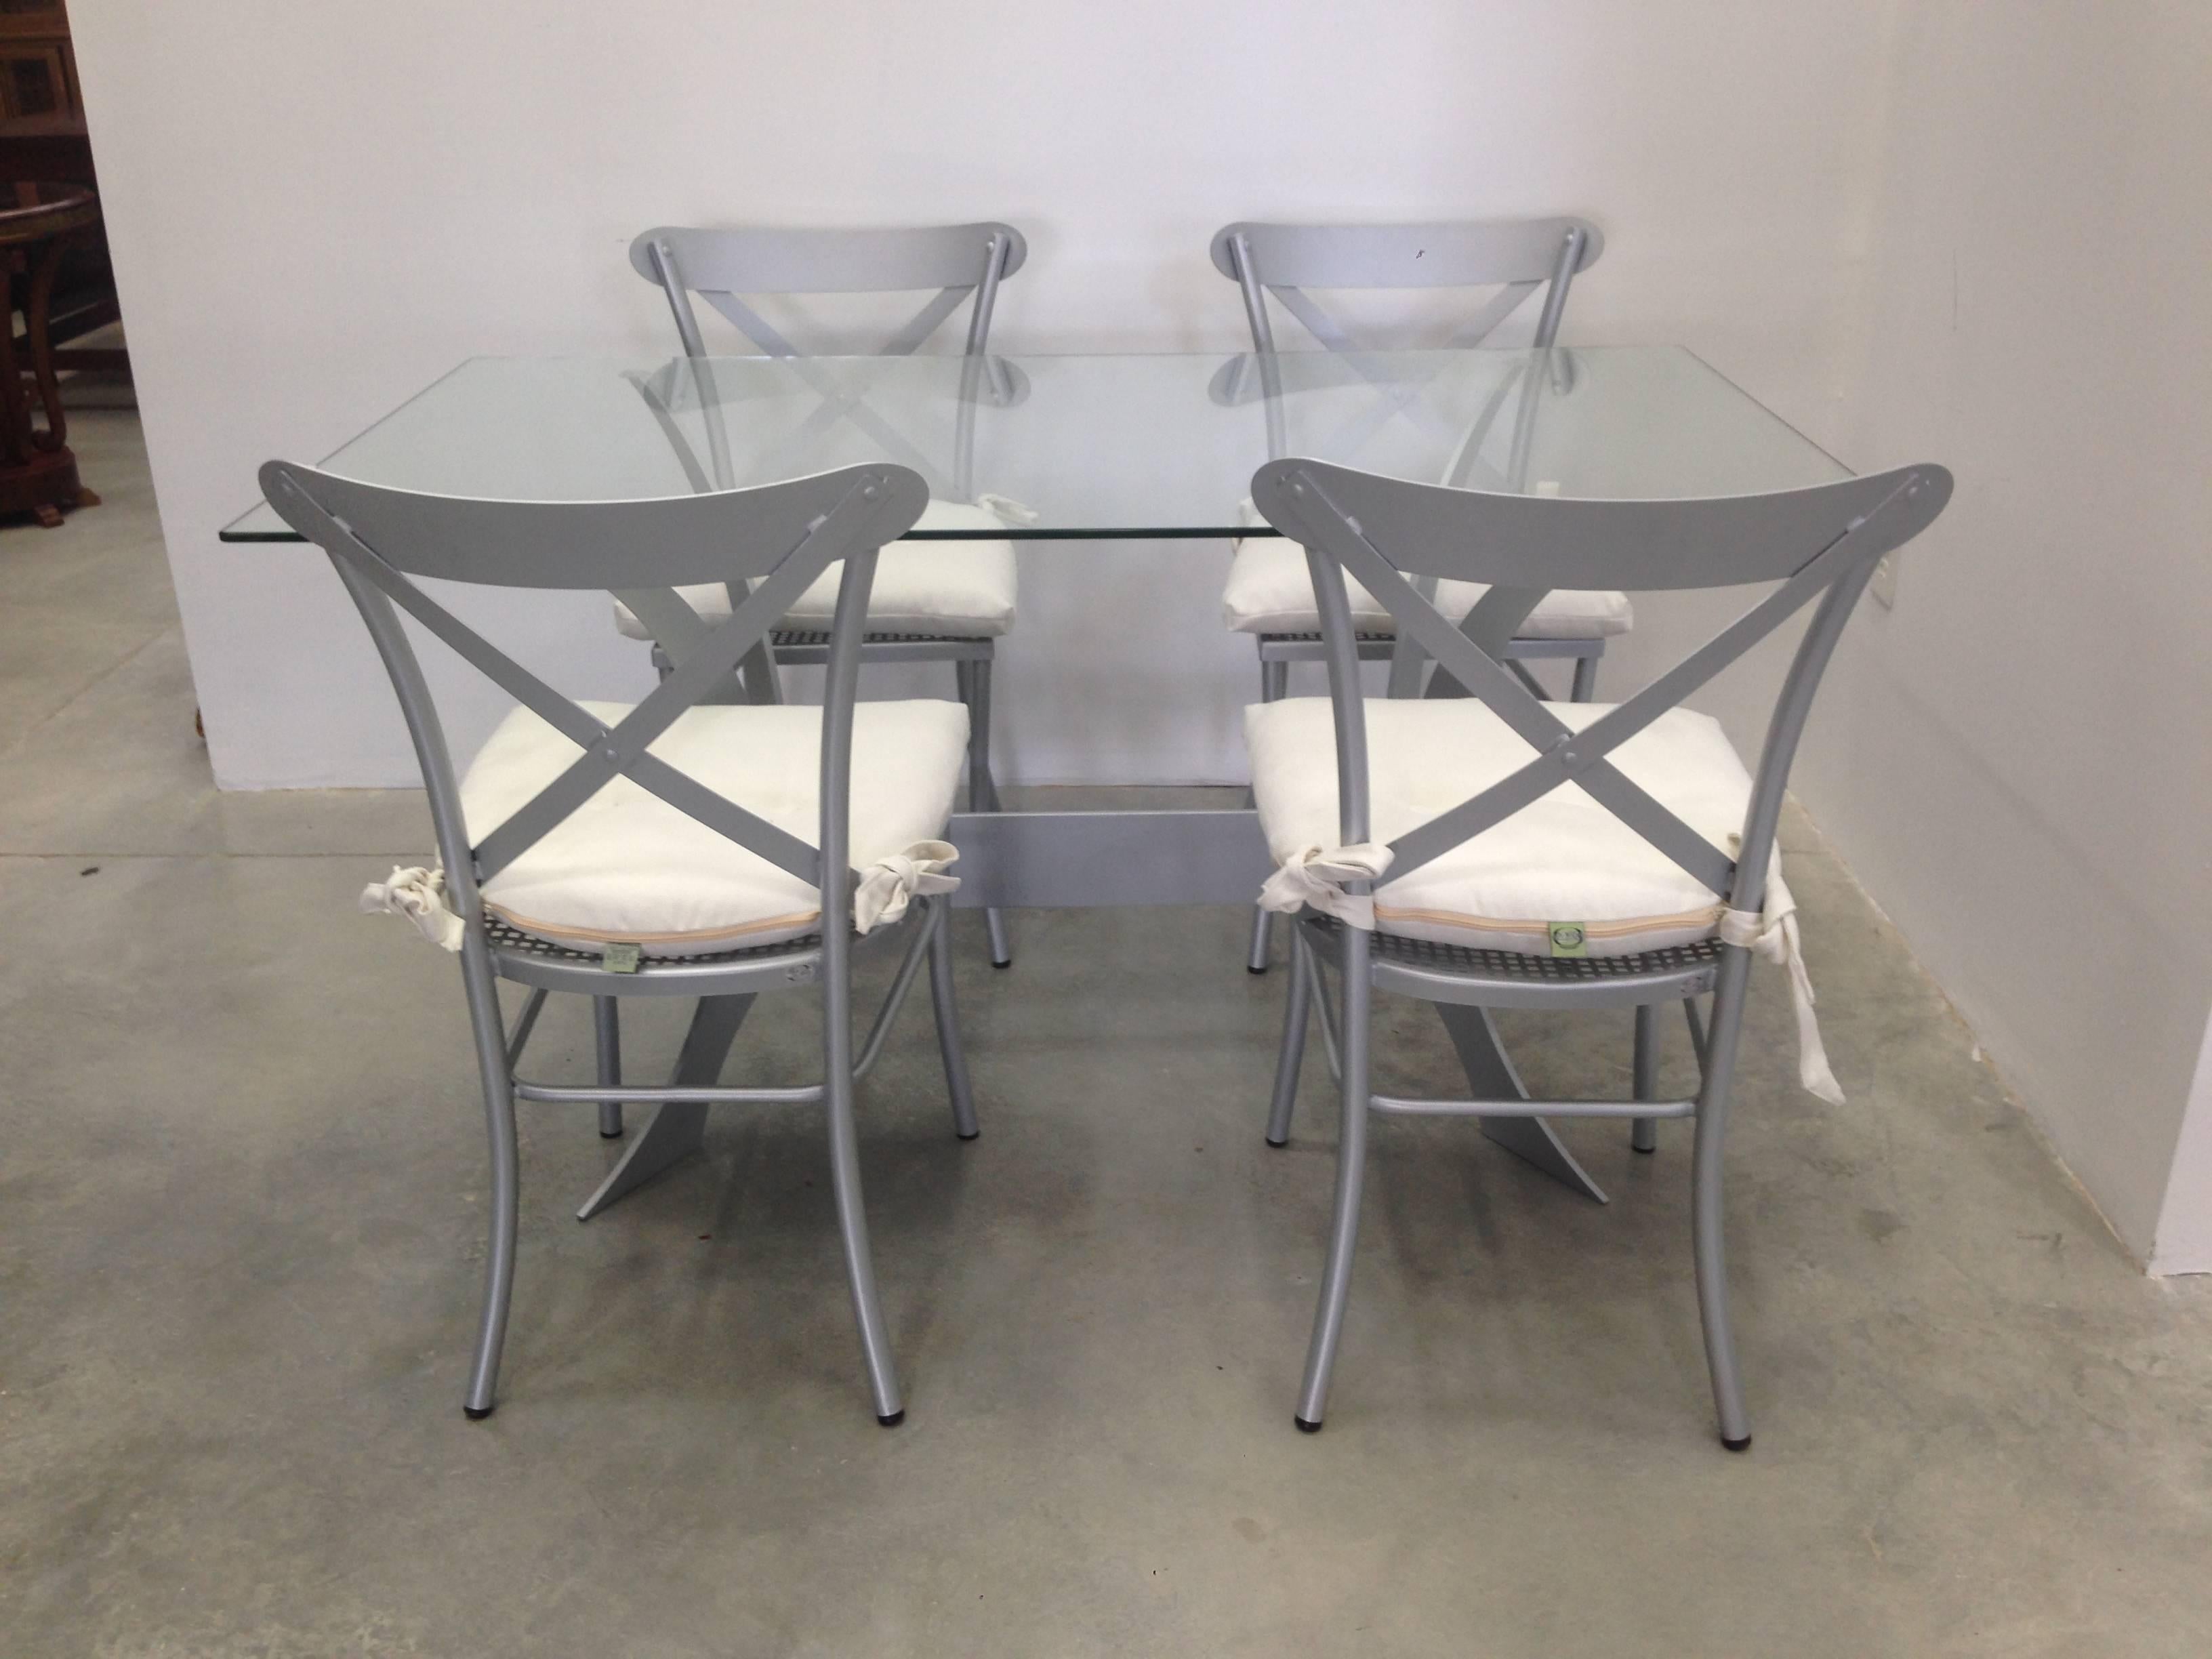 Modern Metal and Glass Dining Set. Garden furniture. Indoor & Outdoor For Sale